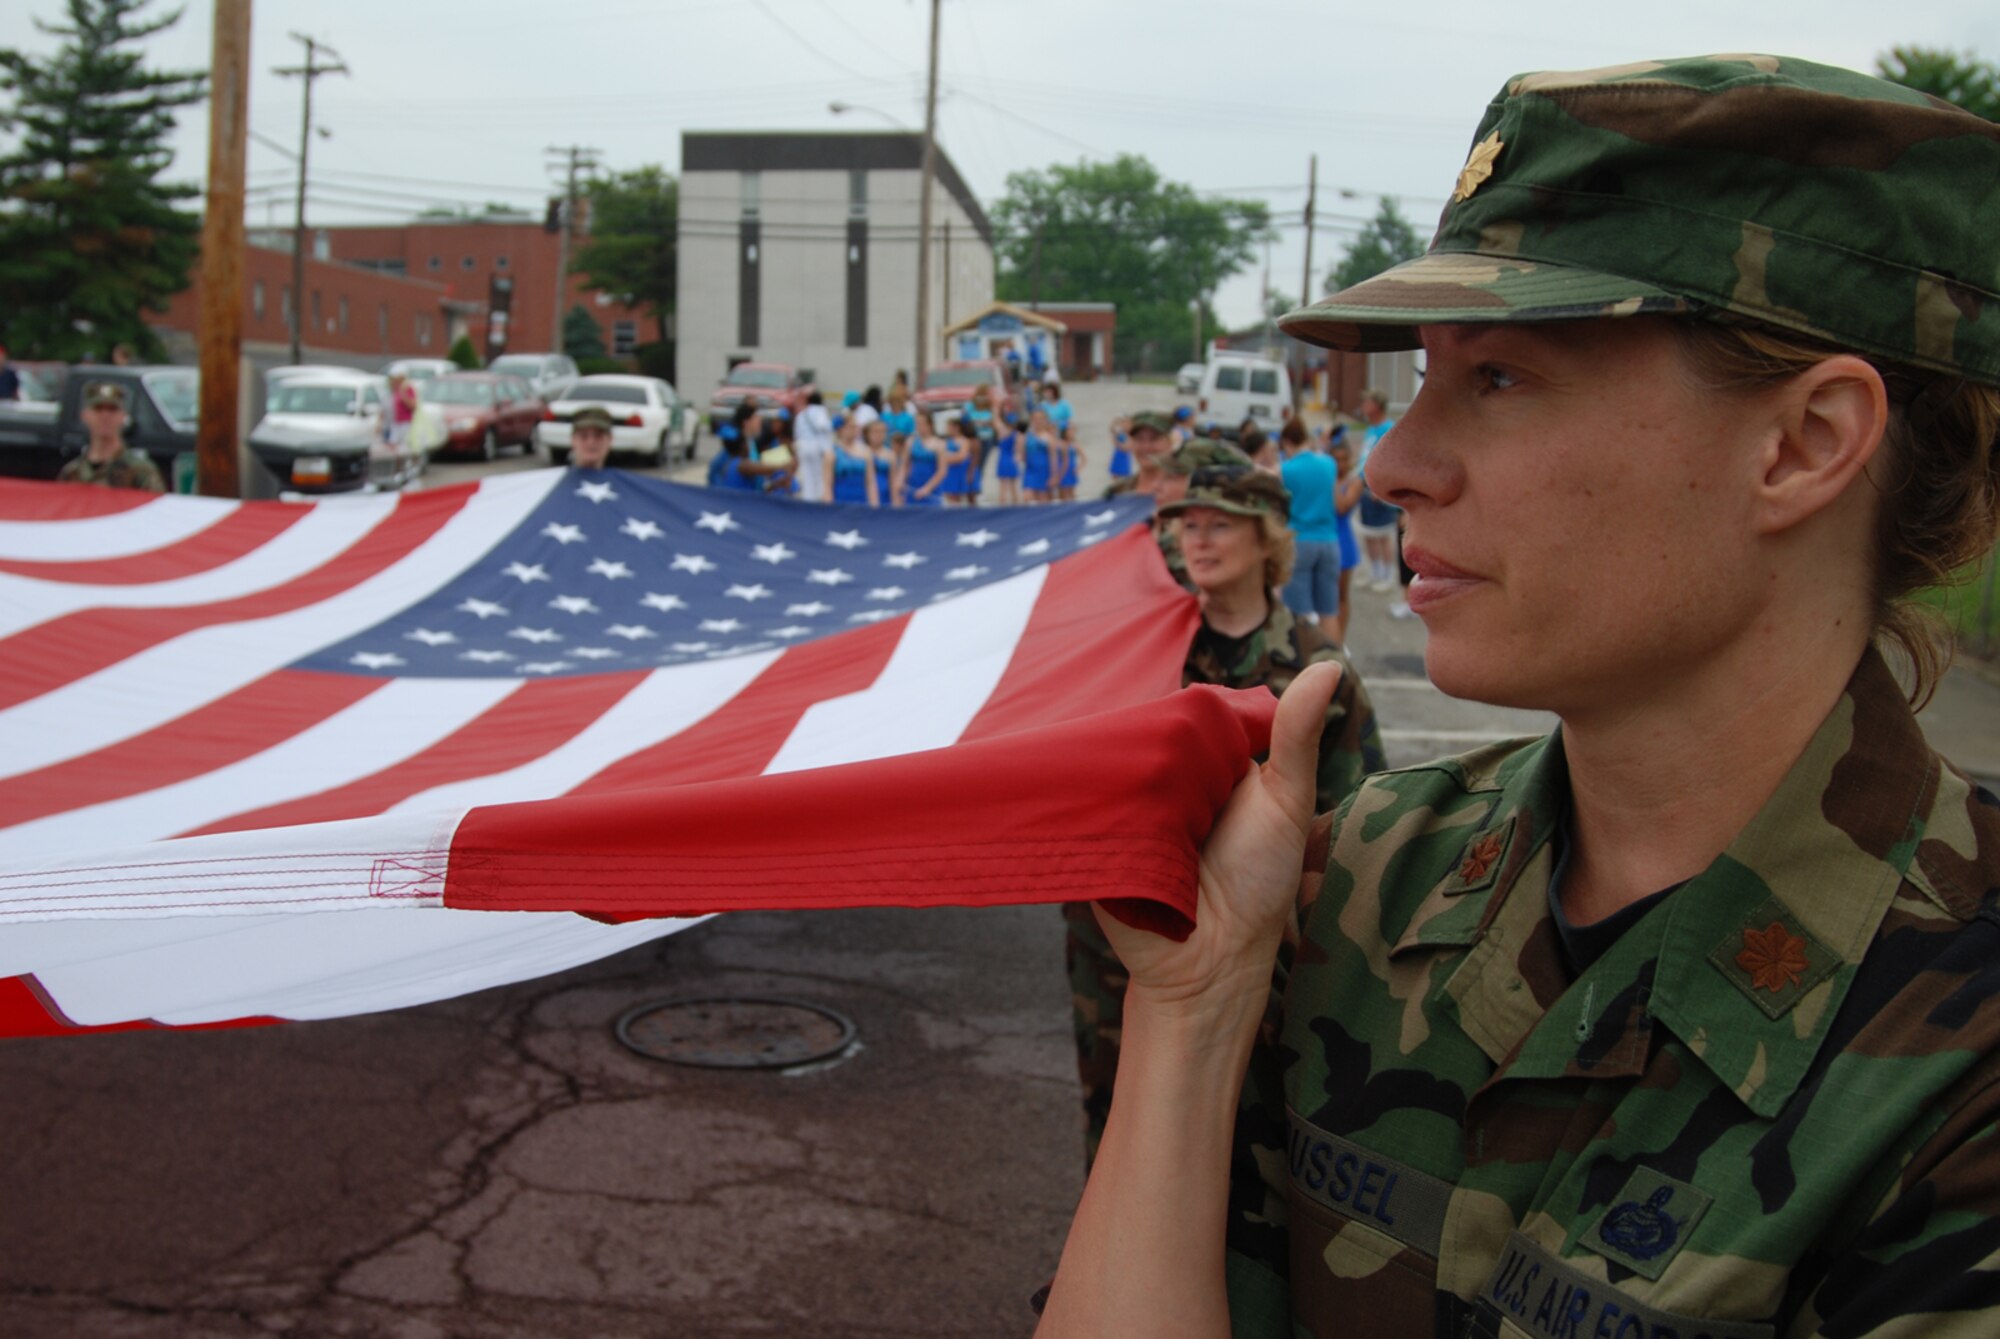 932nd Airlift Wing marches in Memorial Day parade.